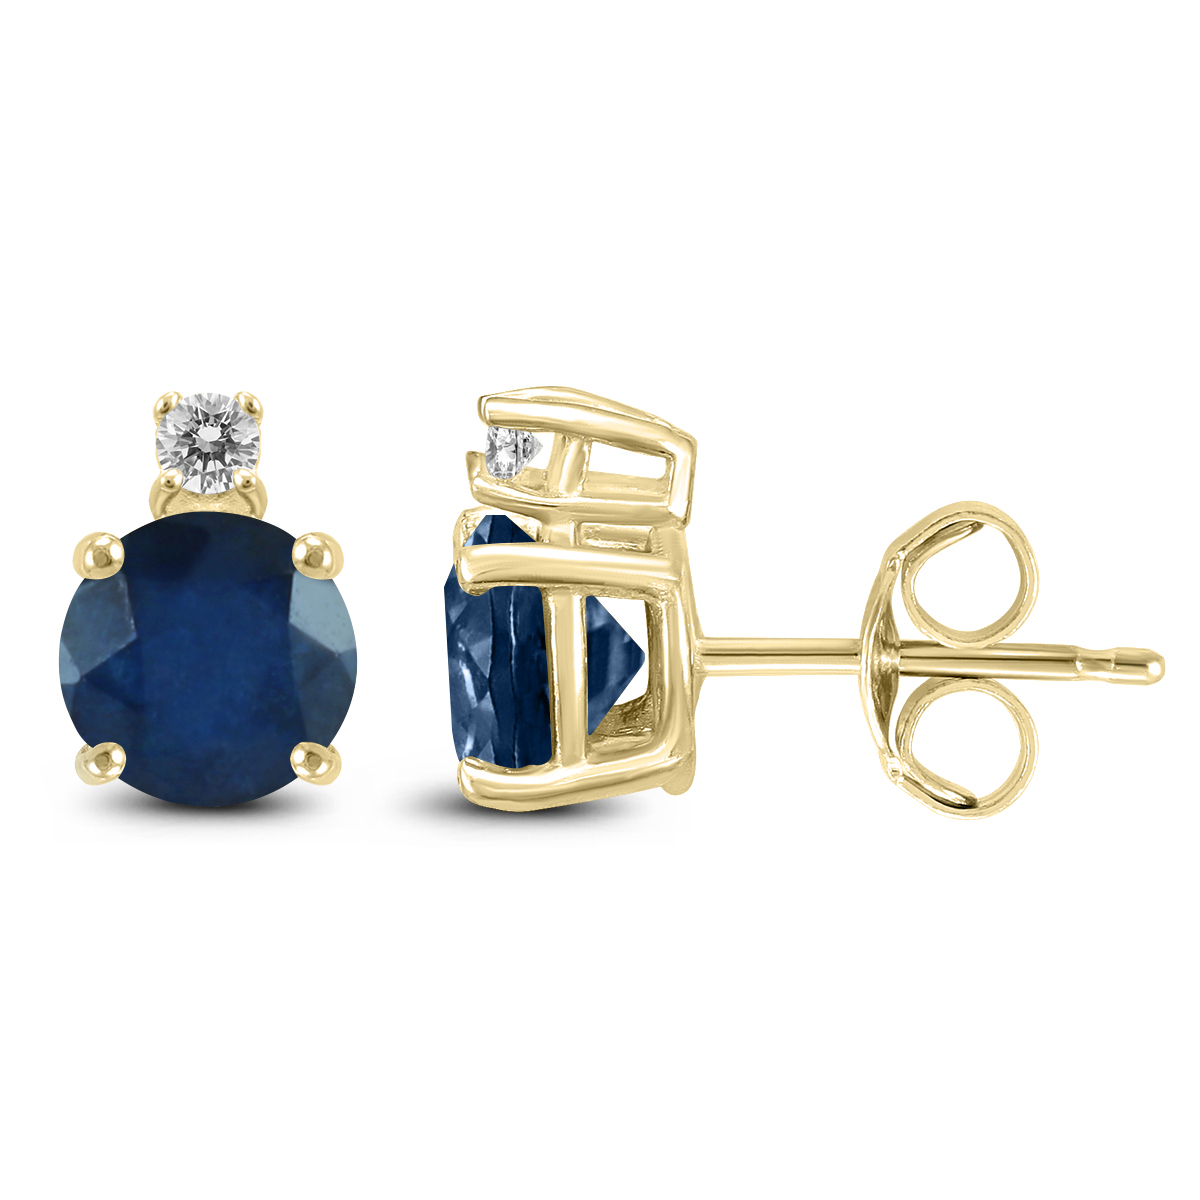 14K Yellow Gold 5MM Round Sapphire and Diamond Earrings